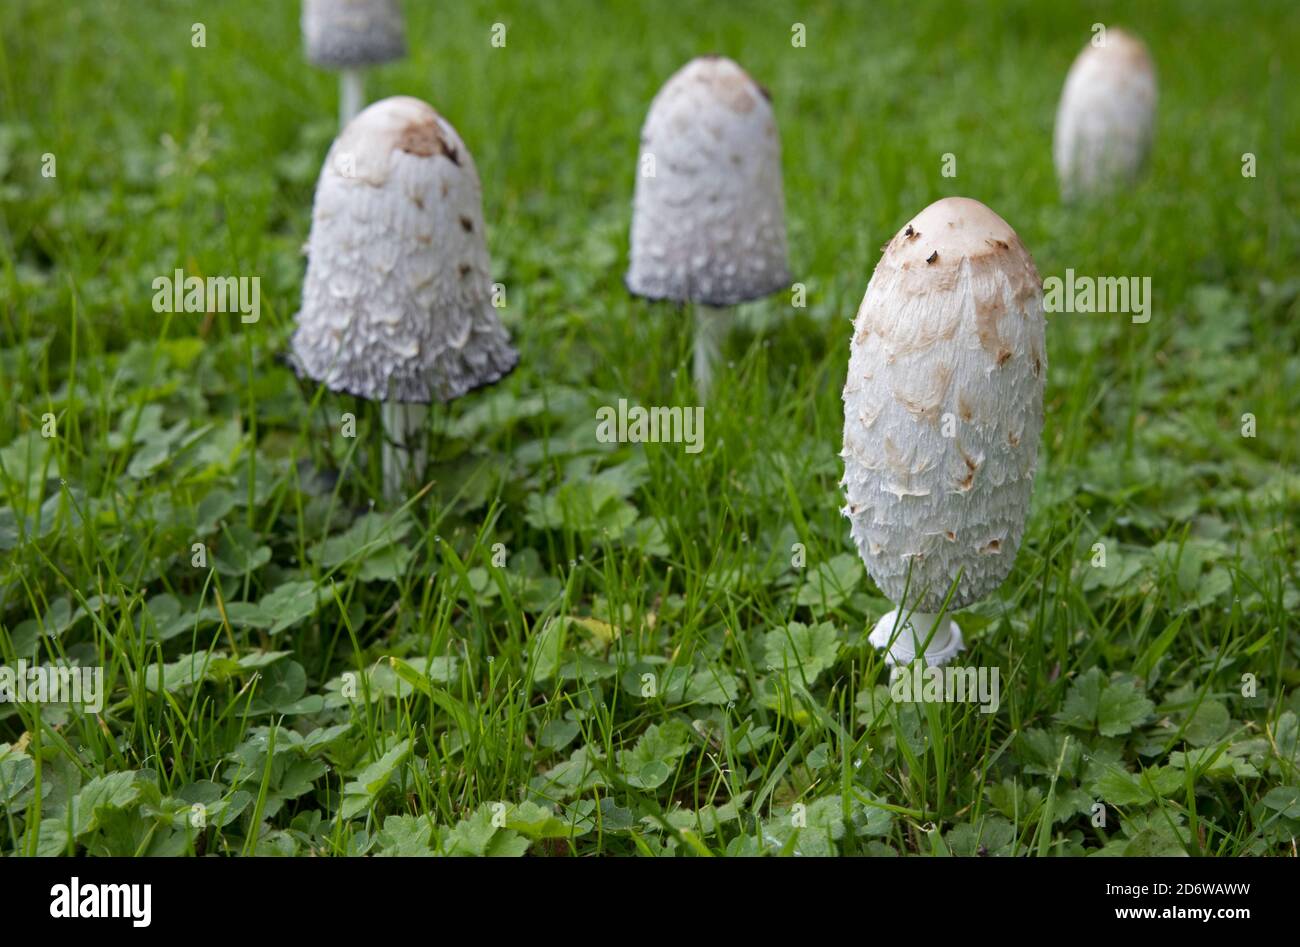 Shaggy Inkcap fungi Coprinus comatus at edible stage in meadow Cotswolds UK Also known as Judges wig or Lawyers wig and as it matures it produces ink. Stock Photo